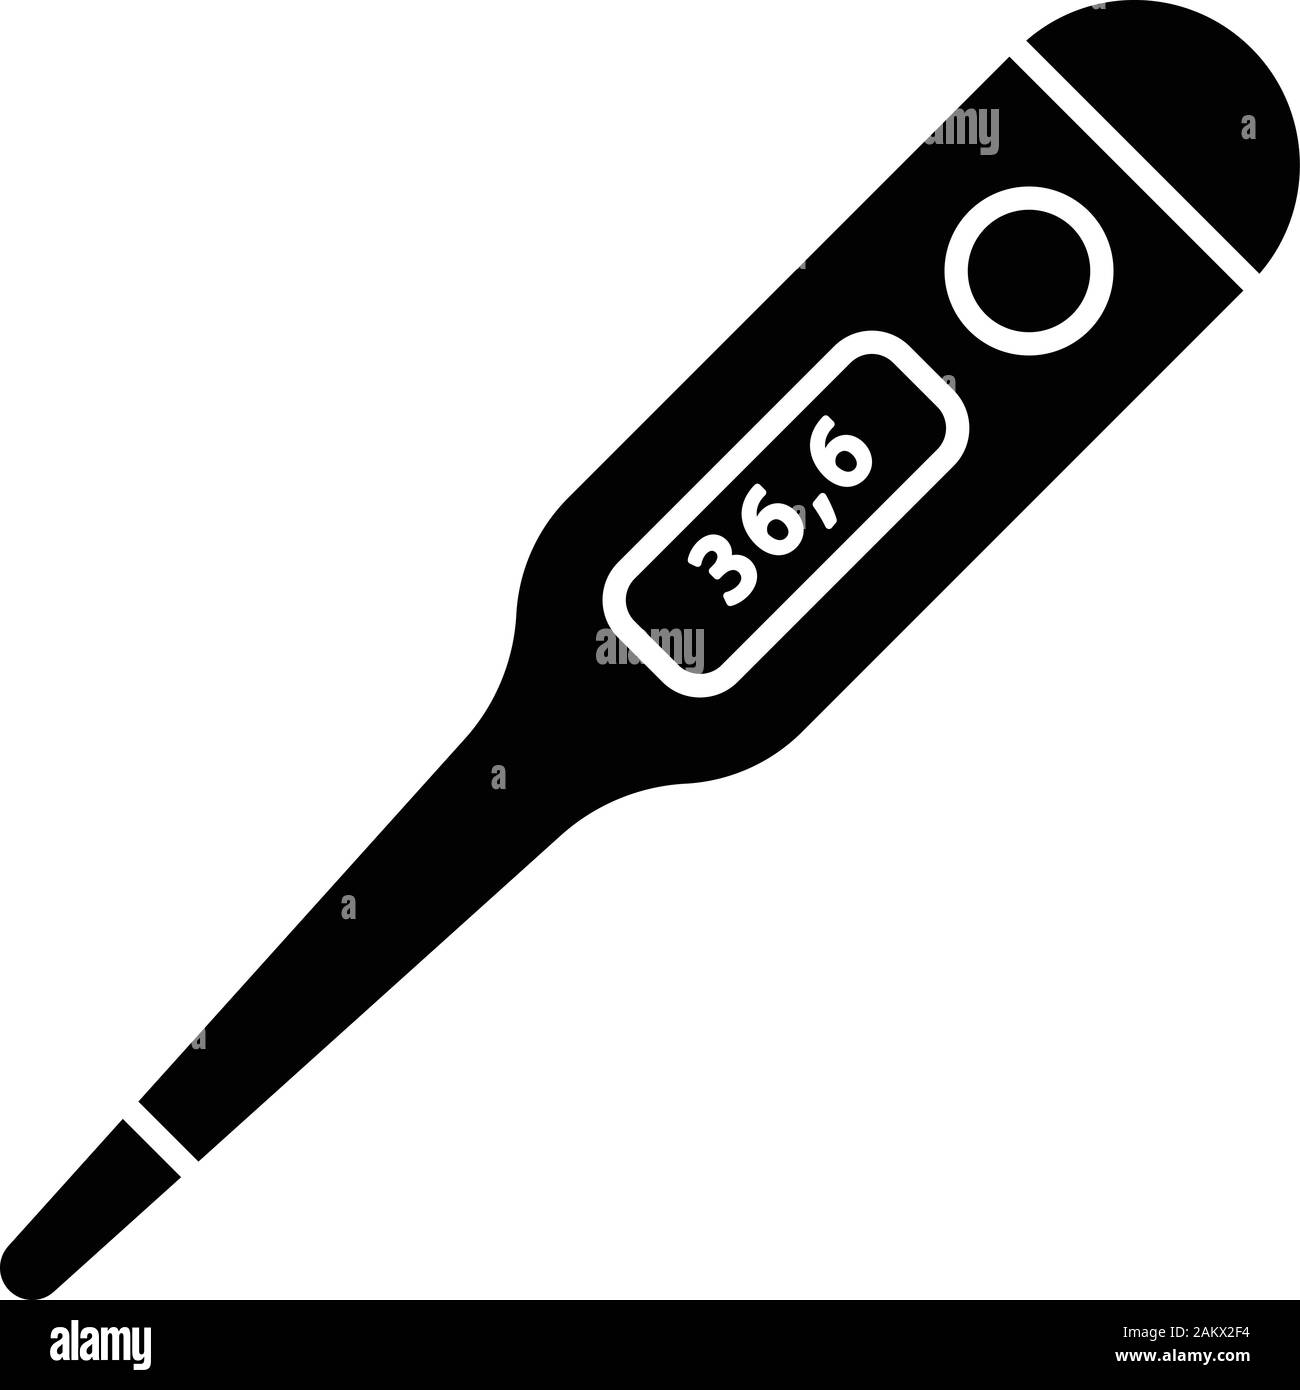 Axillary digital thermometer glyph icon. Body temperature measuring. Electronic thermometer with normal temperature. Medical device. Silhouette symbol Stock Vector